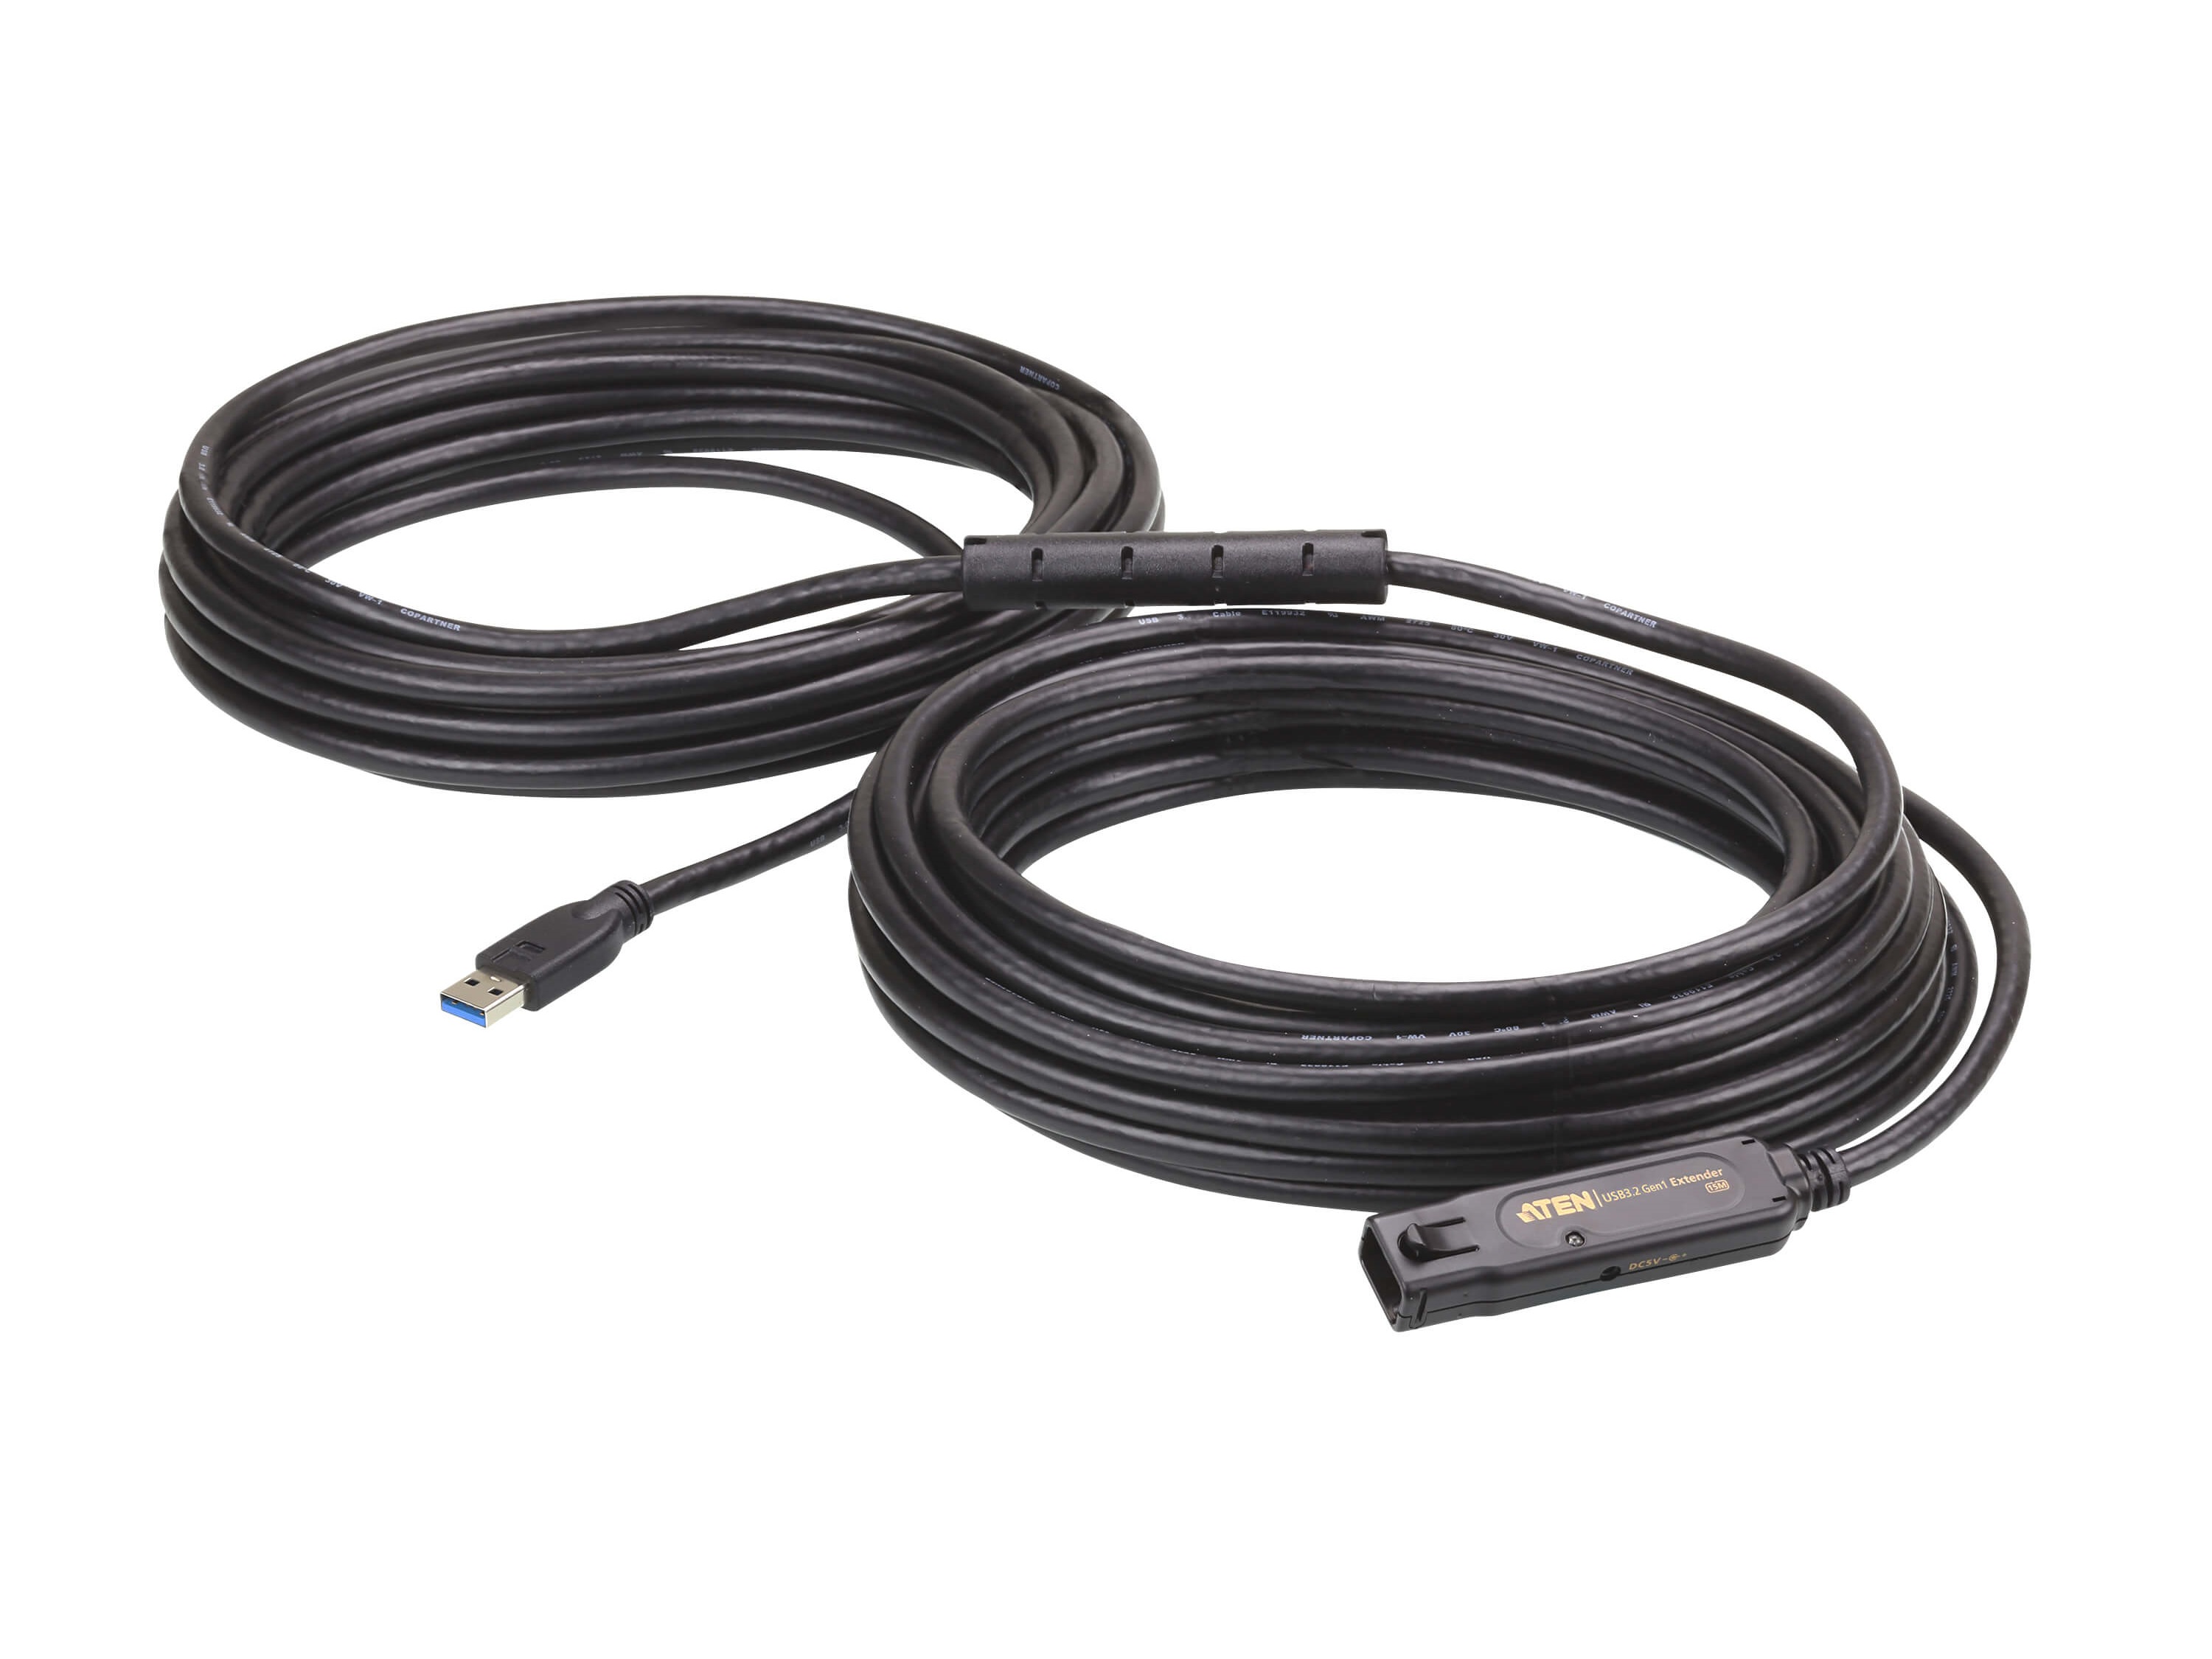 UE3315A 15m USB 3.1 Gen1 Extender Cable by Aten